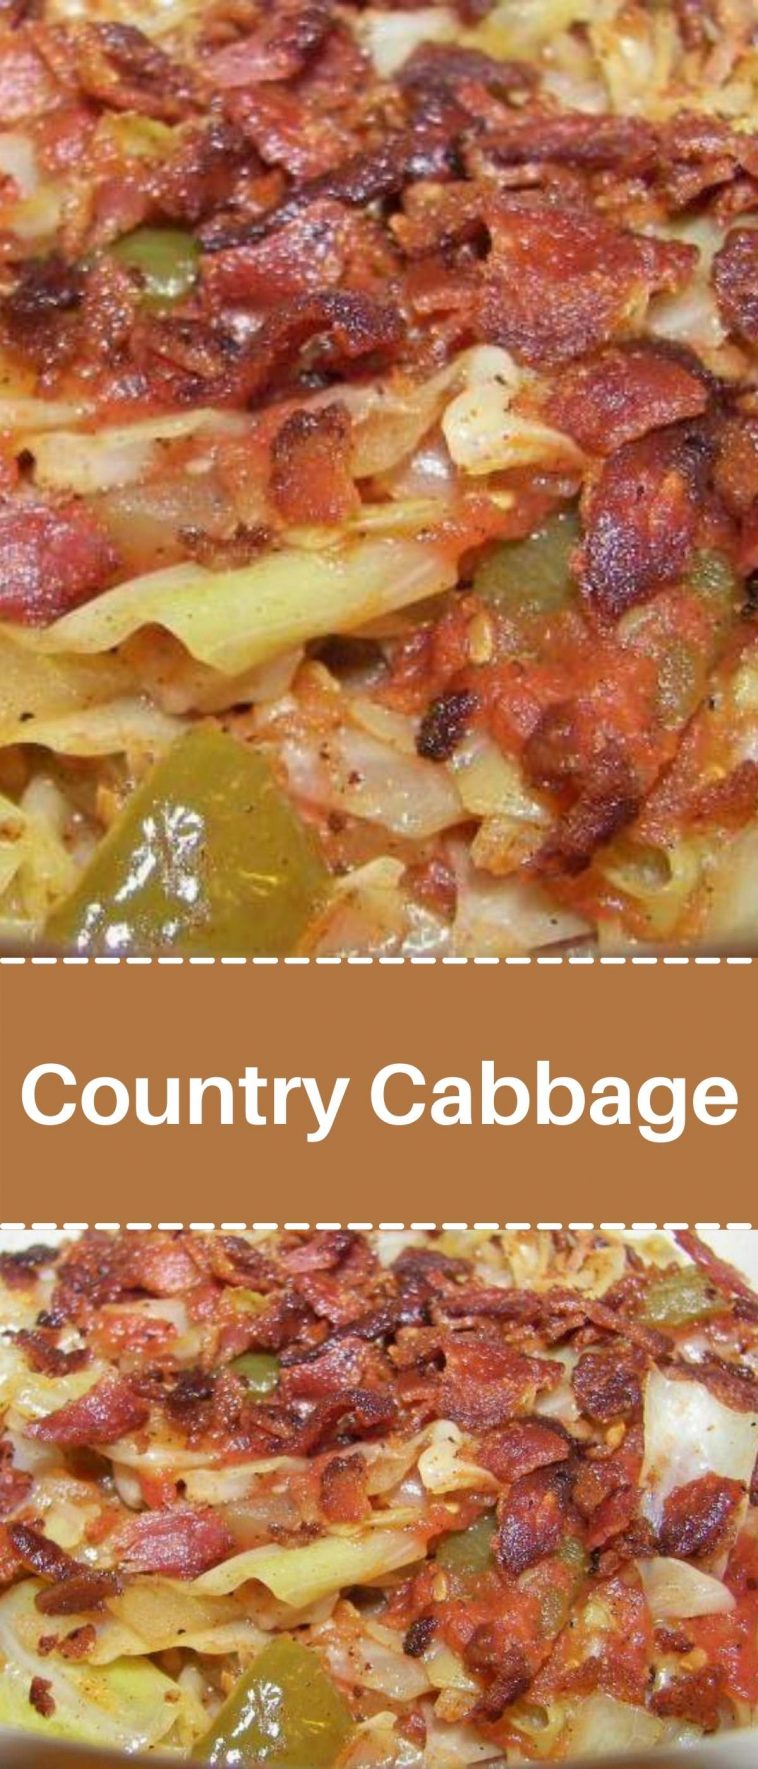 Country Cabbage